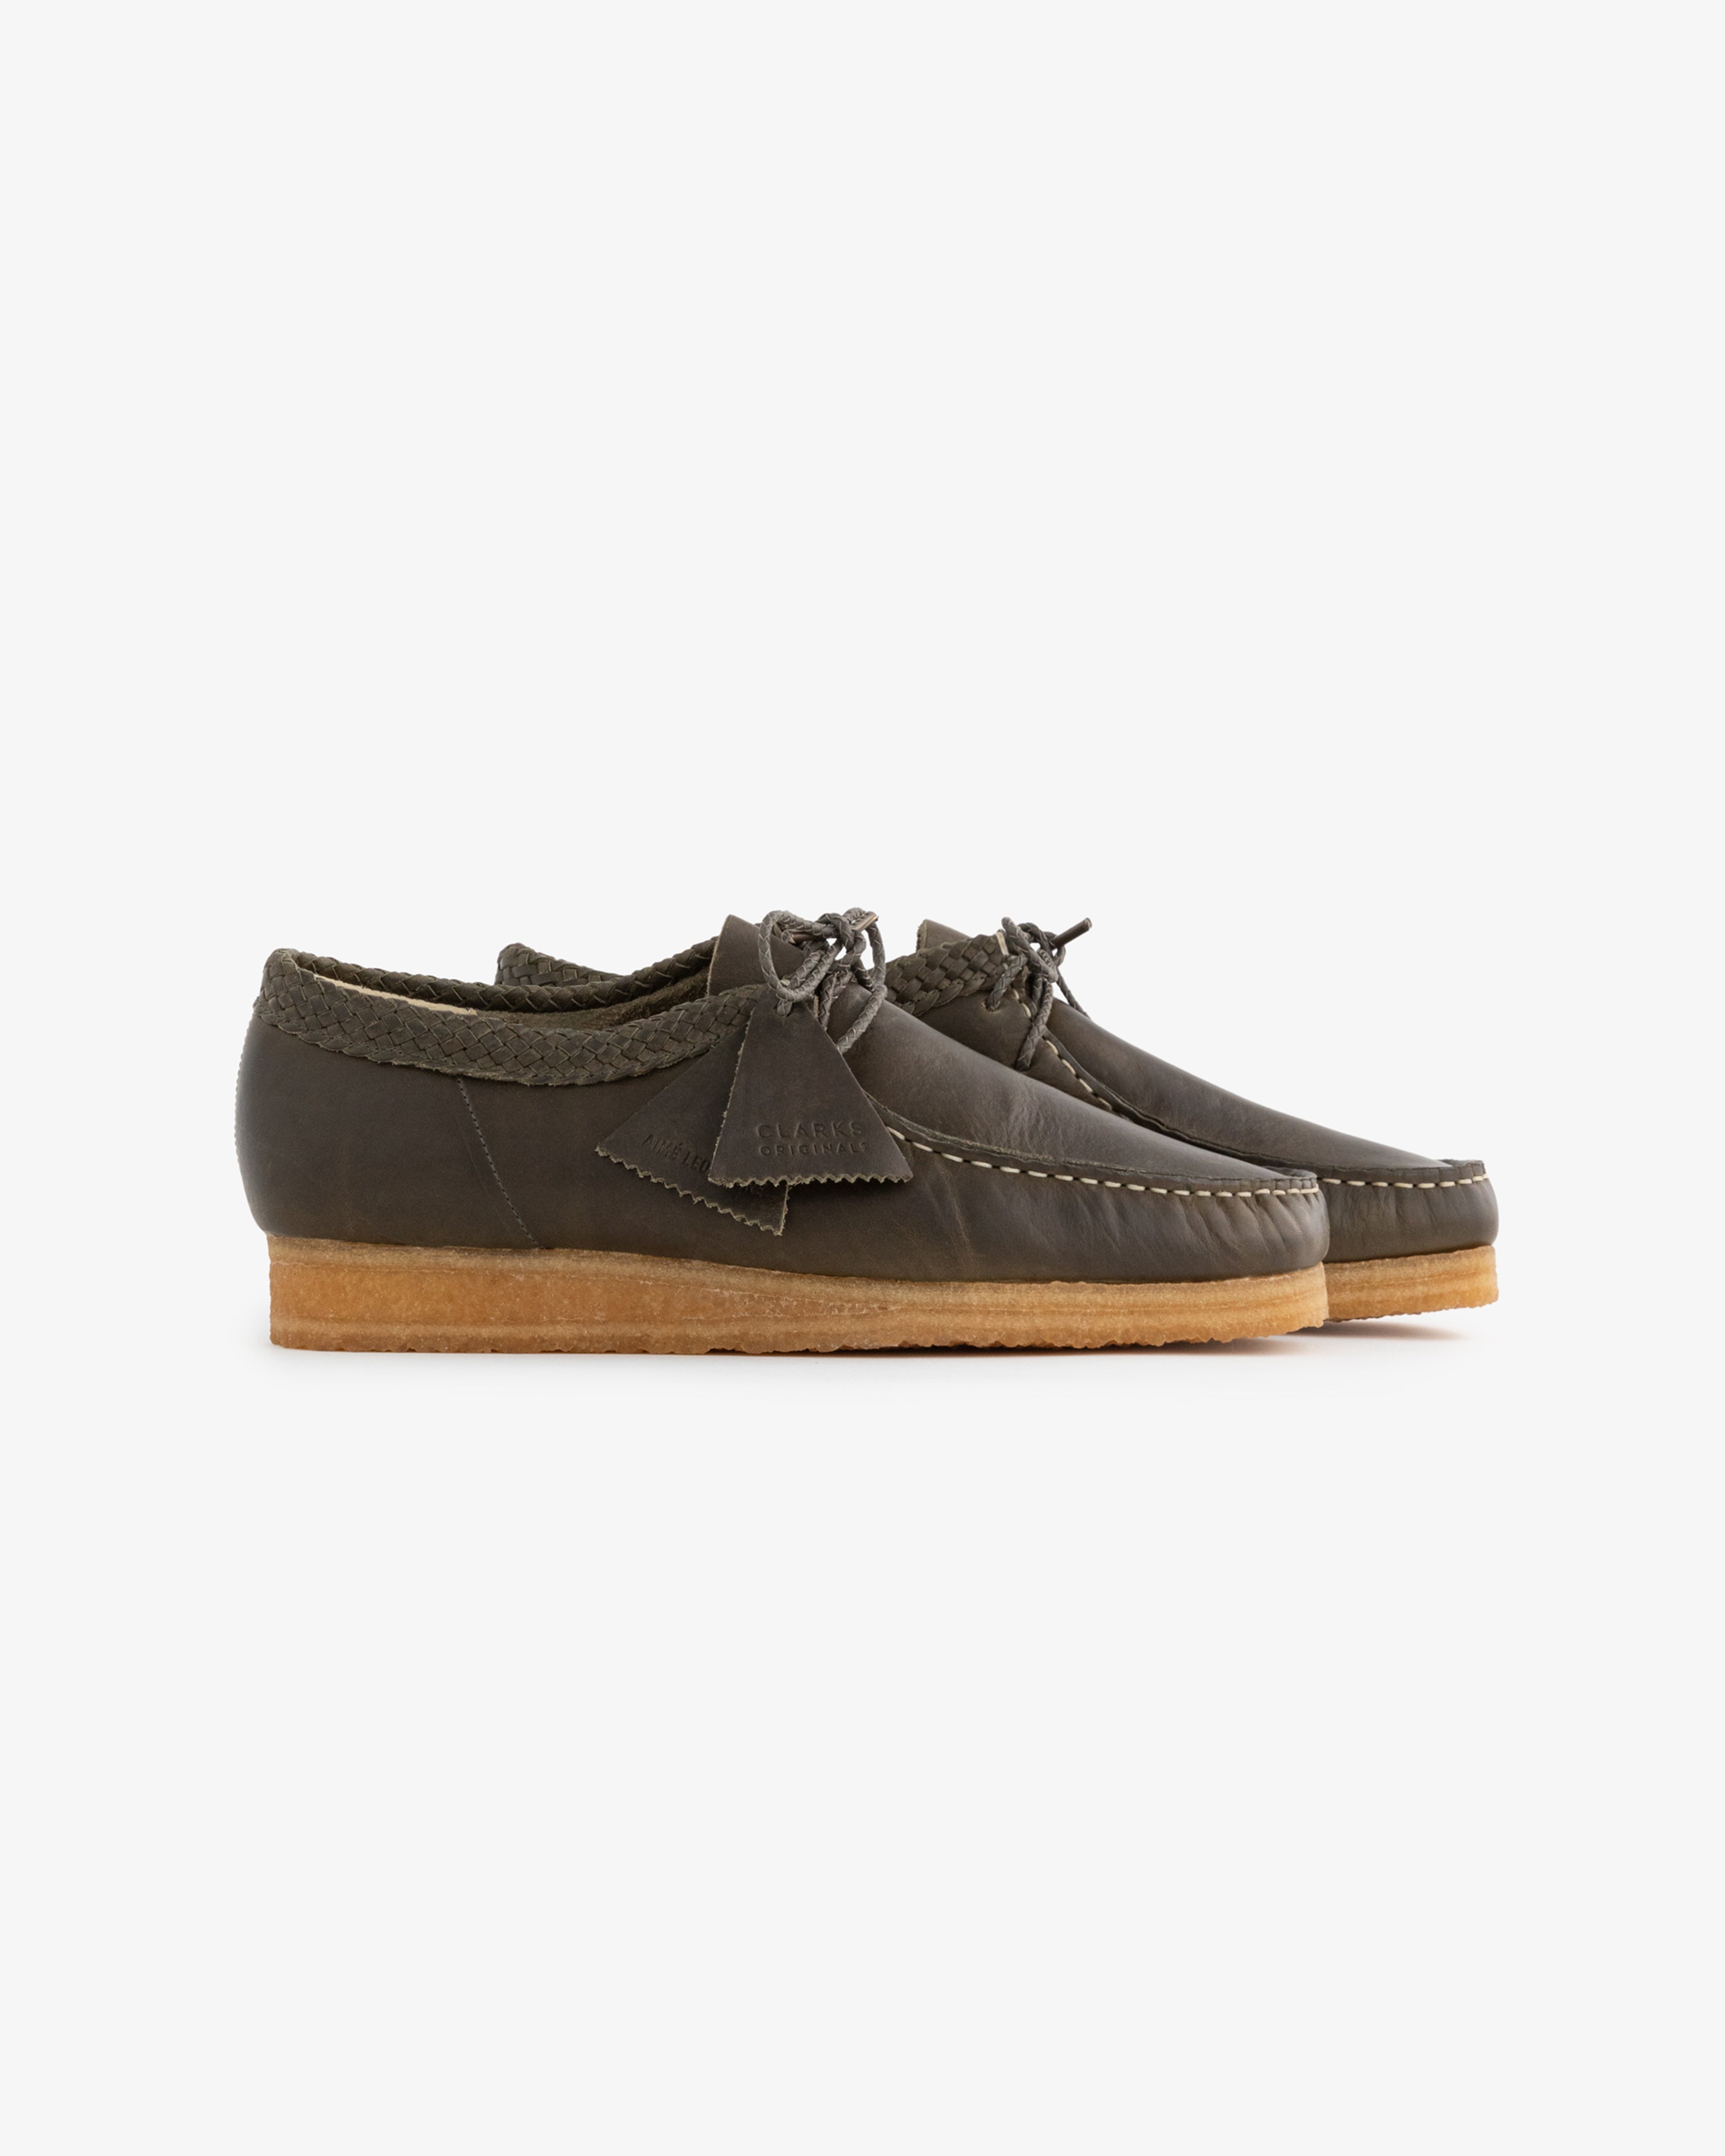 ALD / Clarks Leather Wallabees